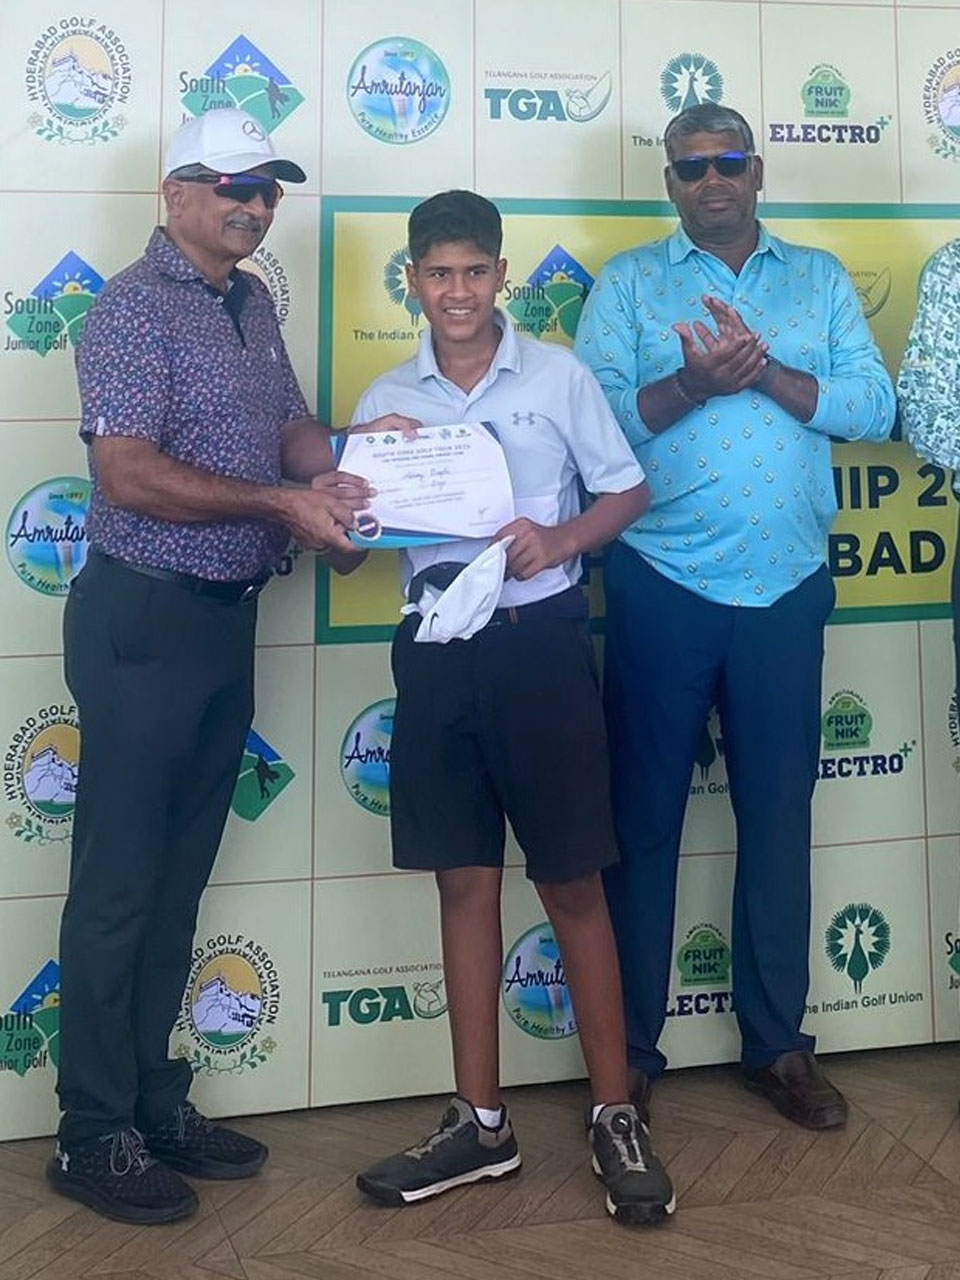 Advay Bagla finished 2nd in Category C Boys  at the HGA South Zone Junior Golf Championship